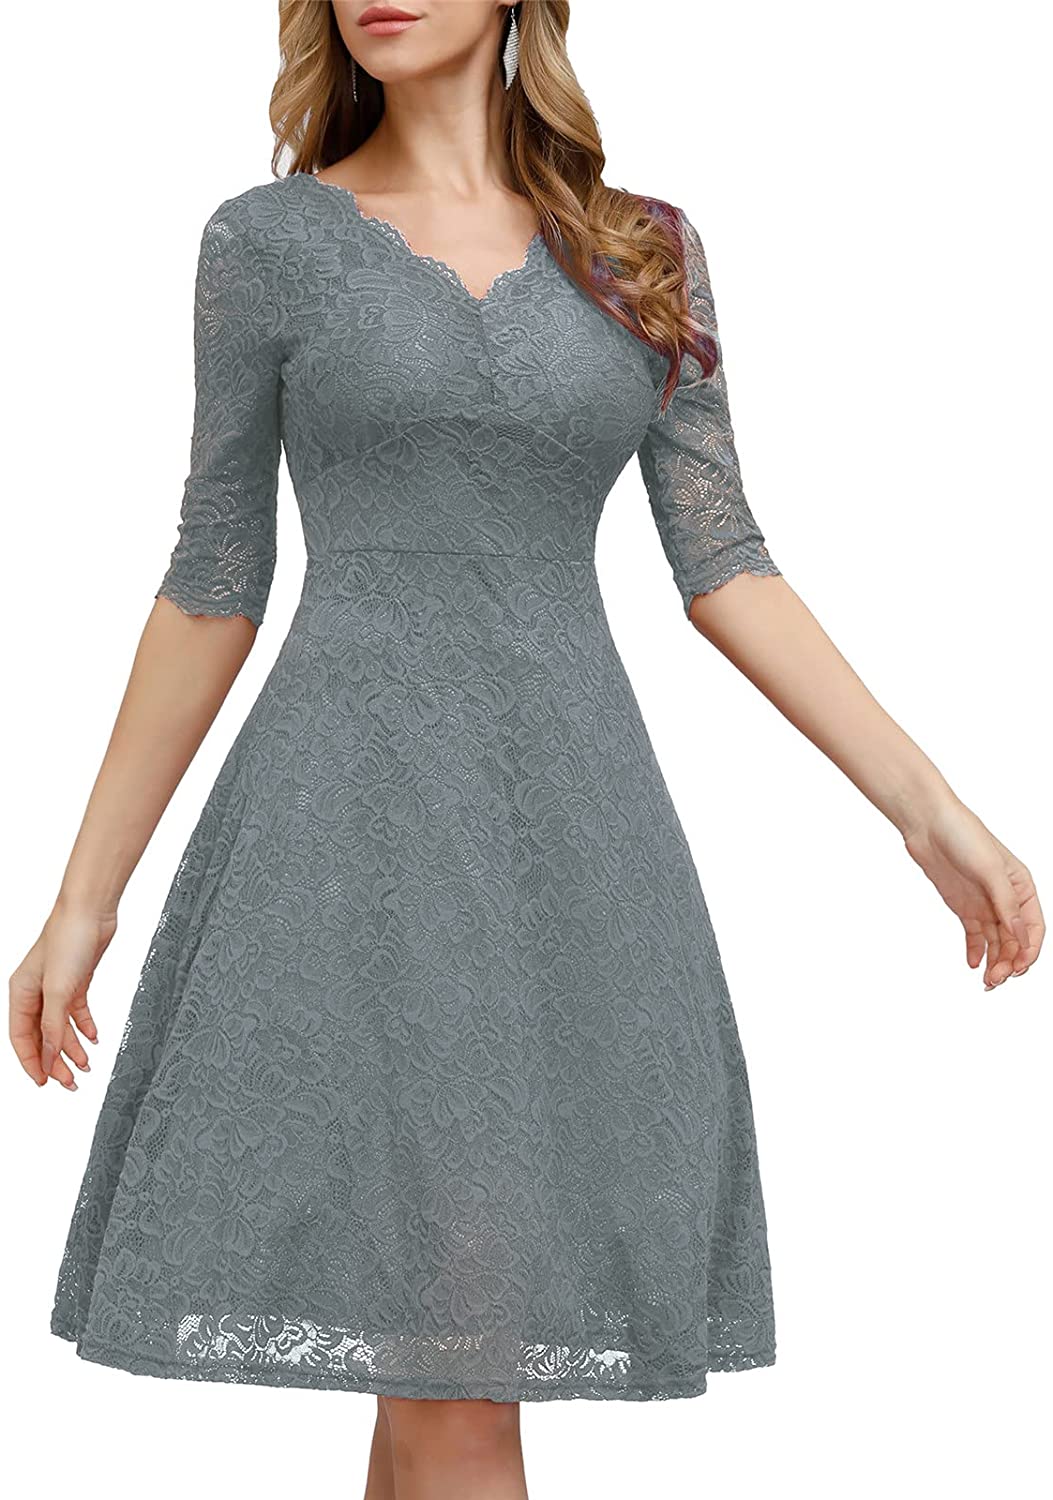 JASAMBAC Cocktail Dress for Women Vintage Wedding Guest Lace Midi